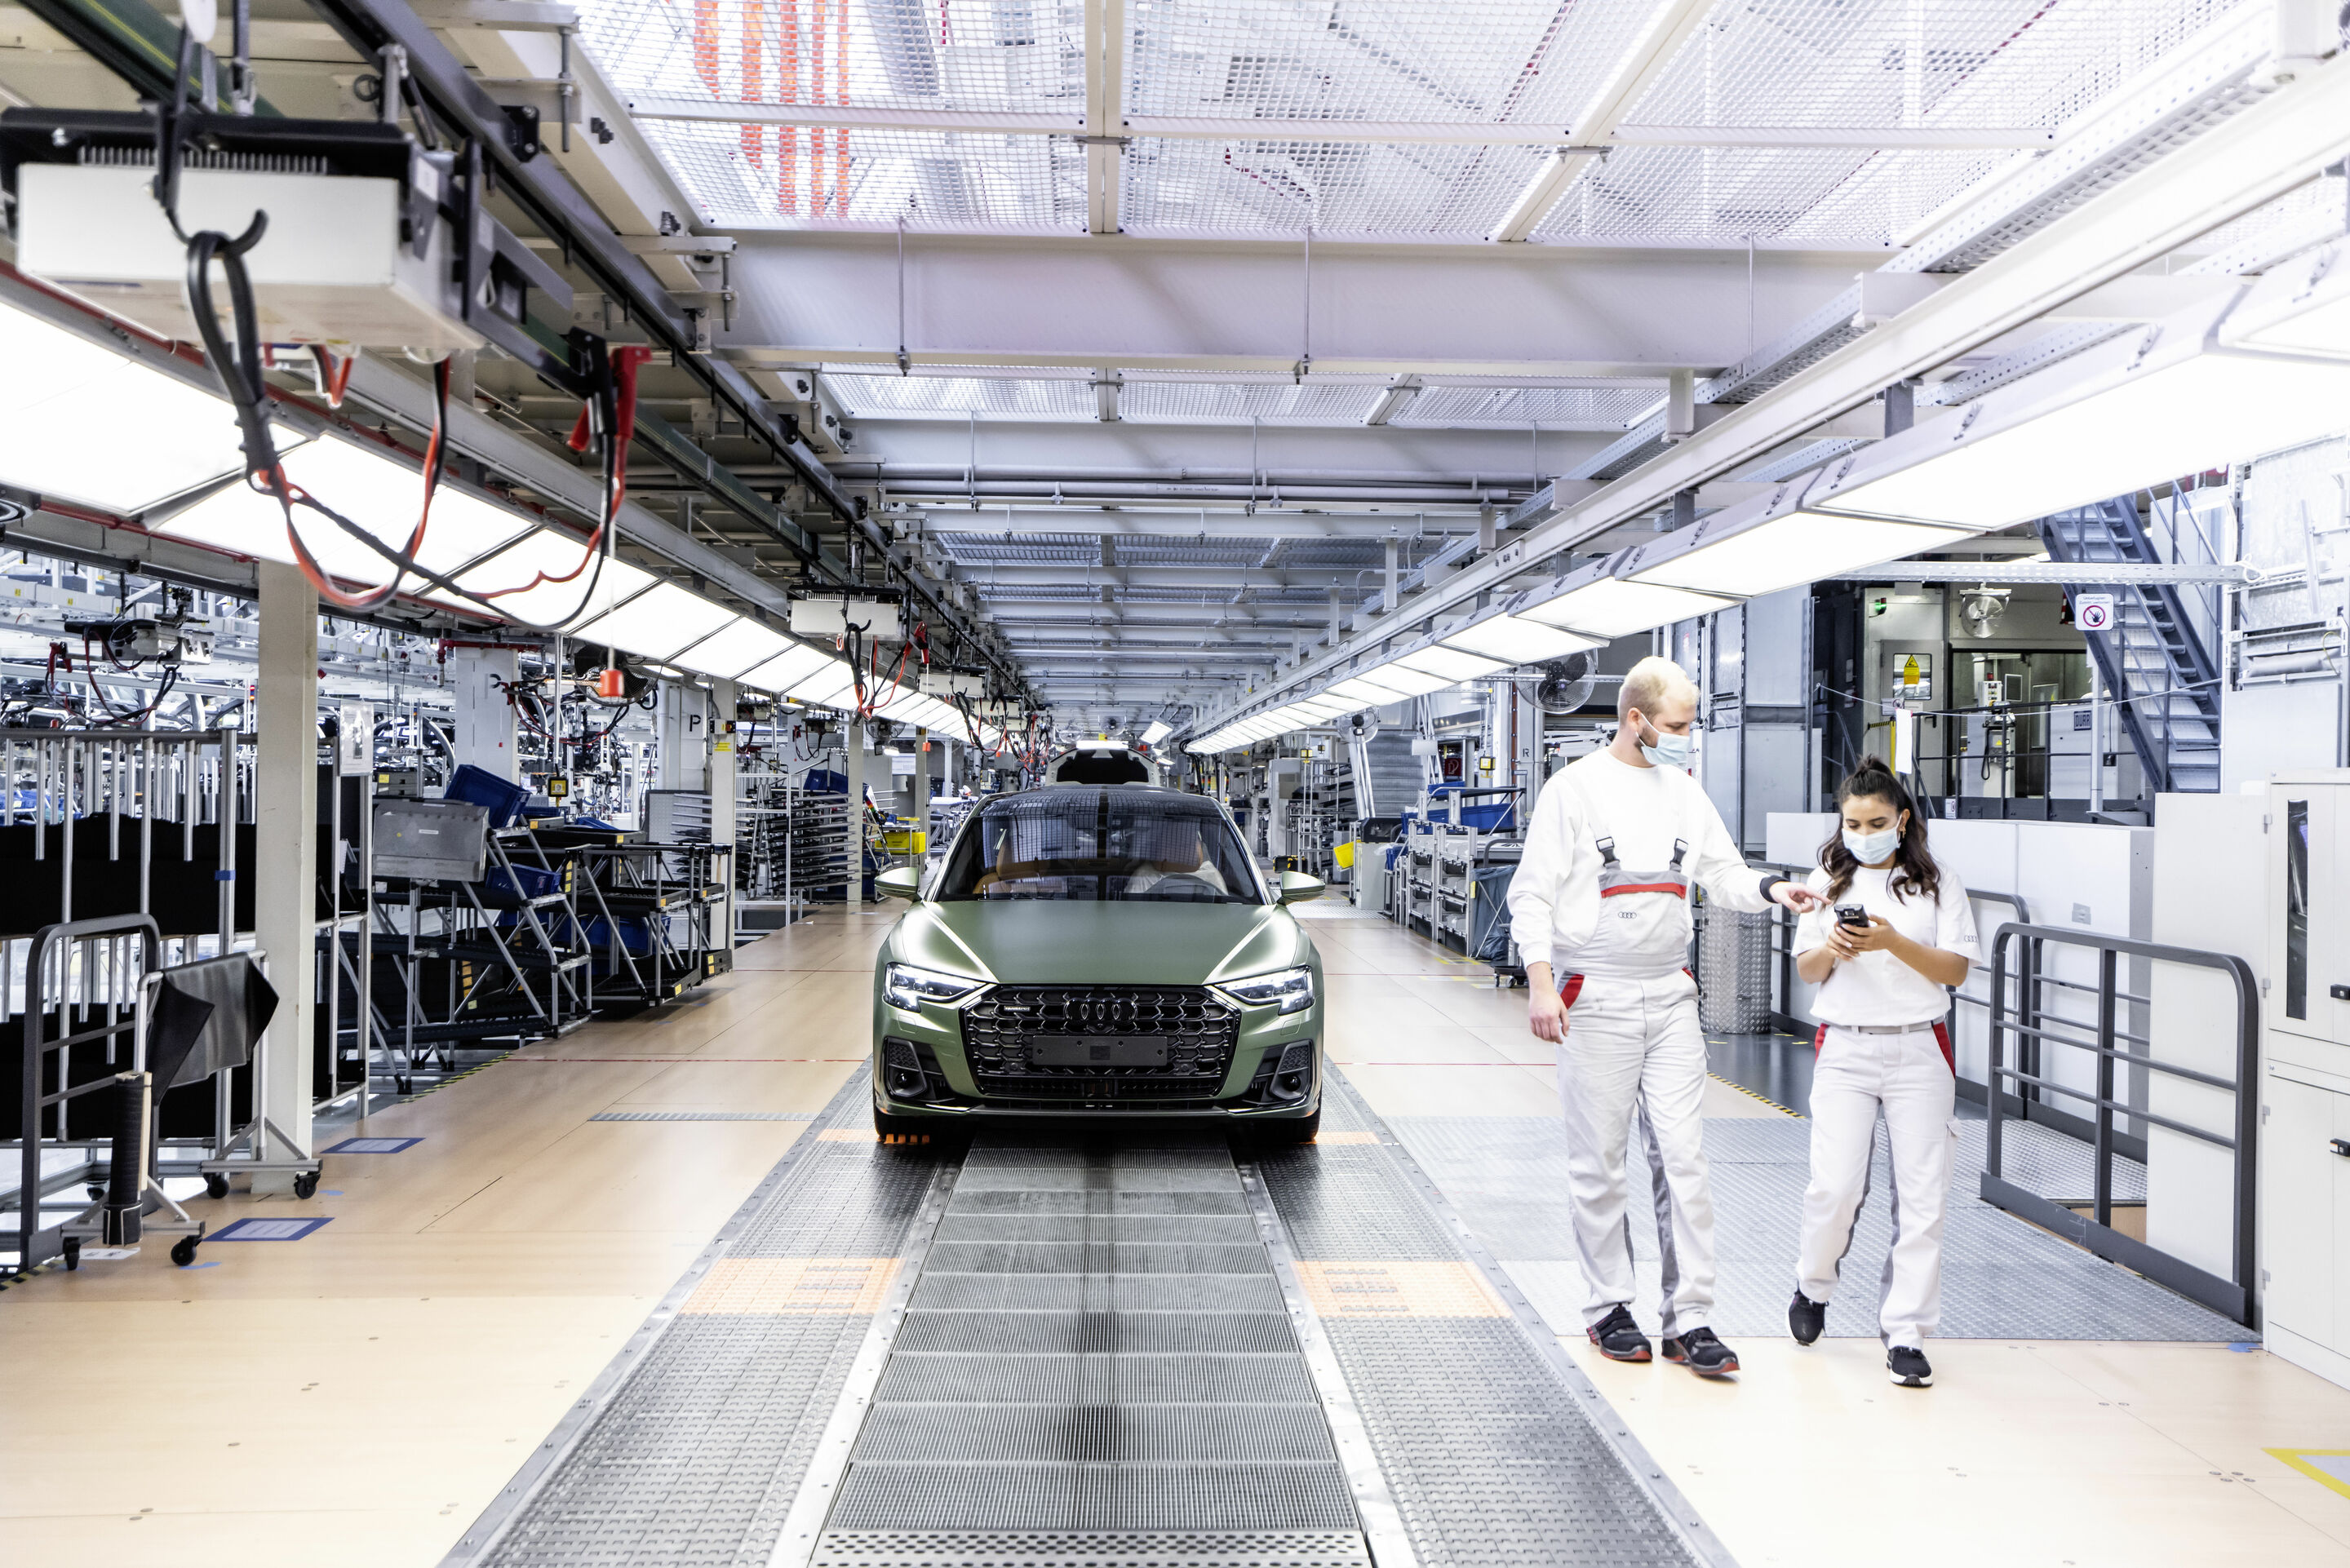 Vehicle production at the Neckarsulm site